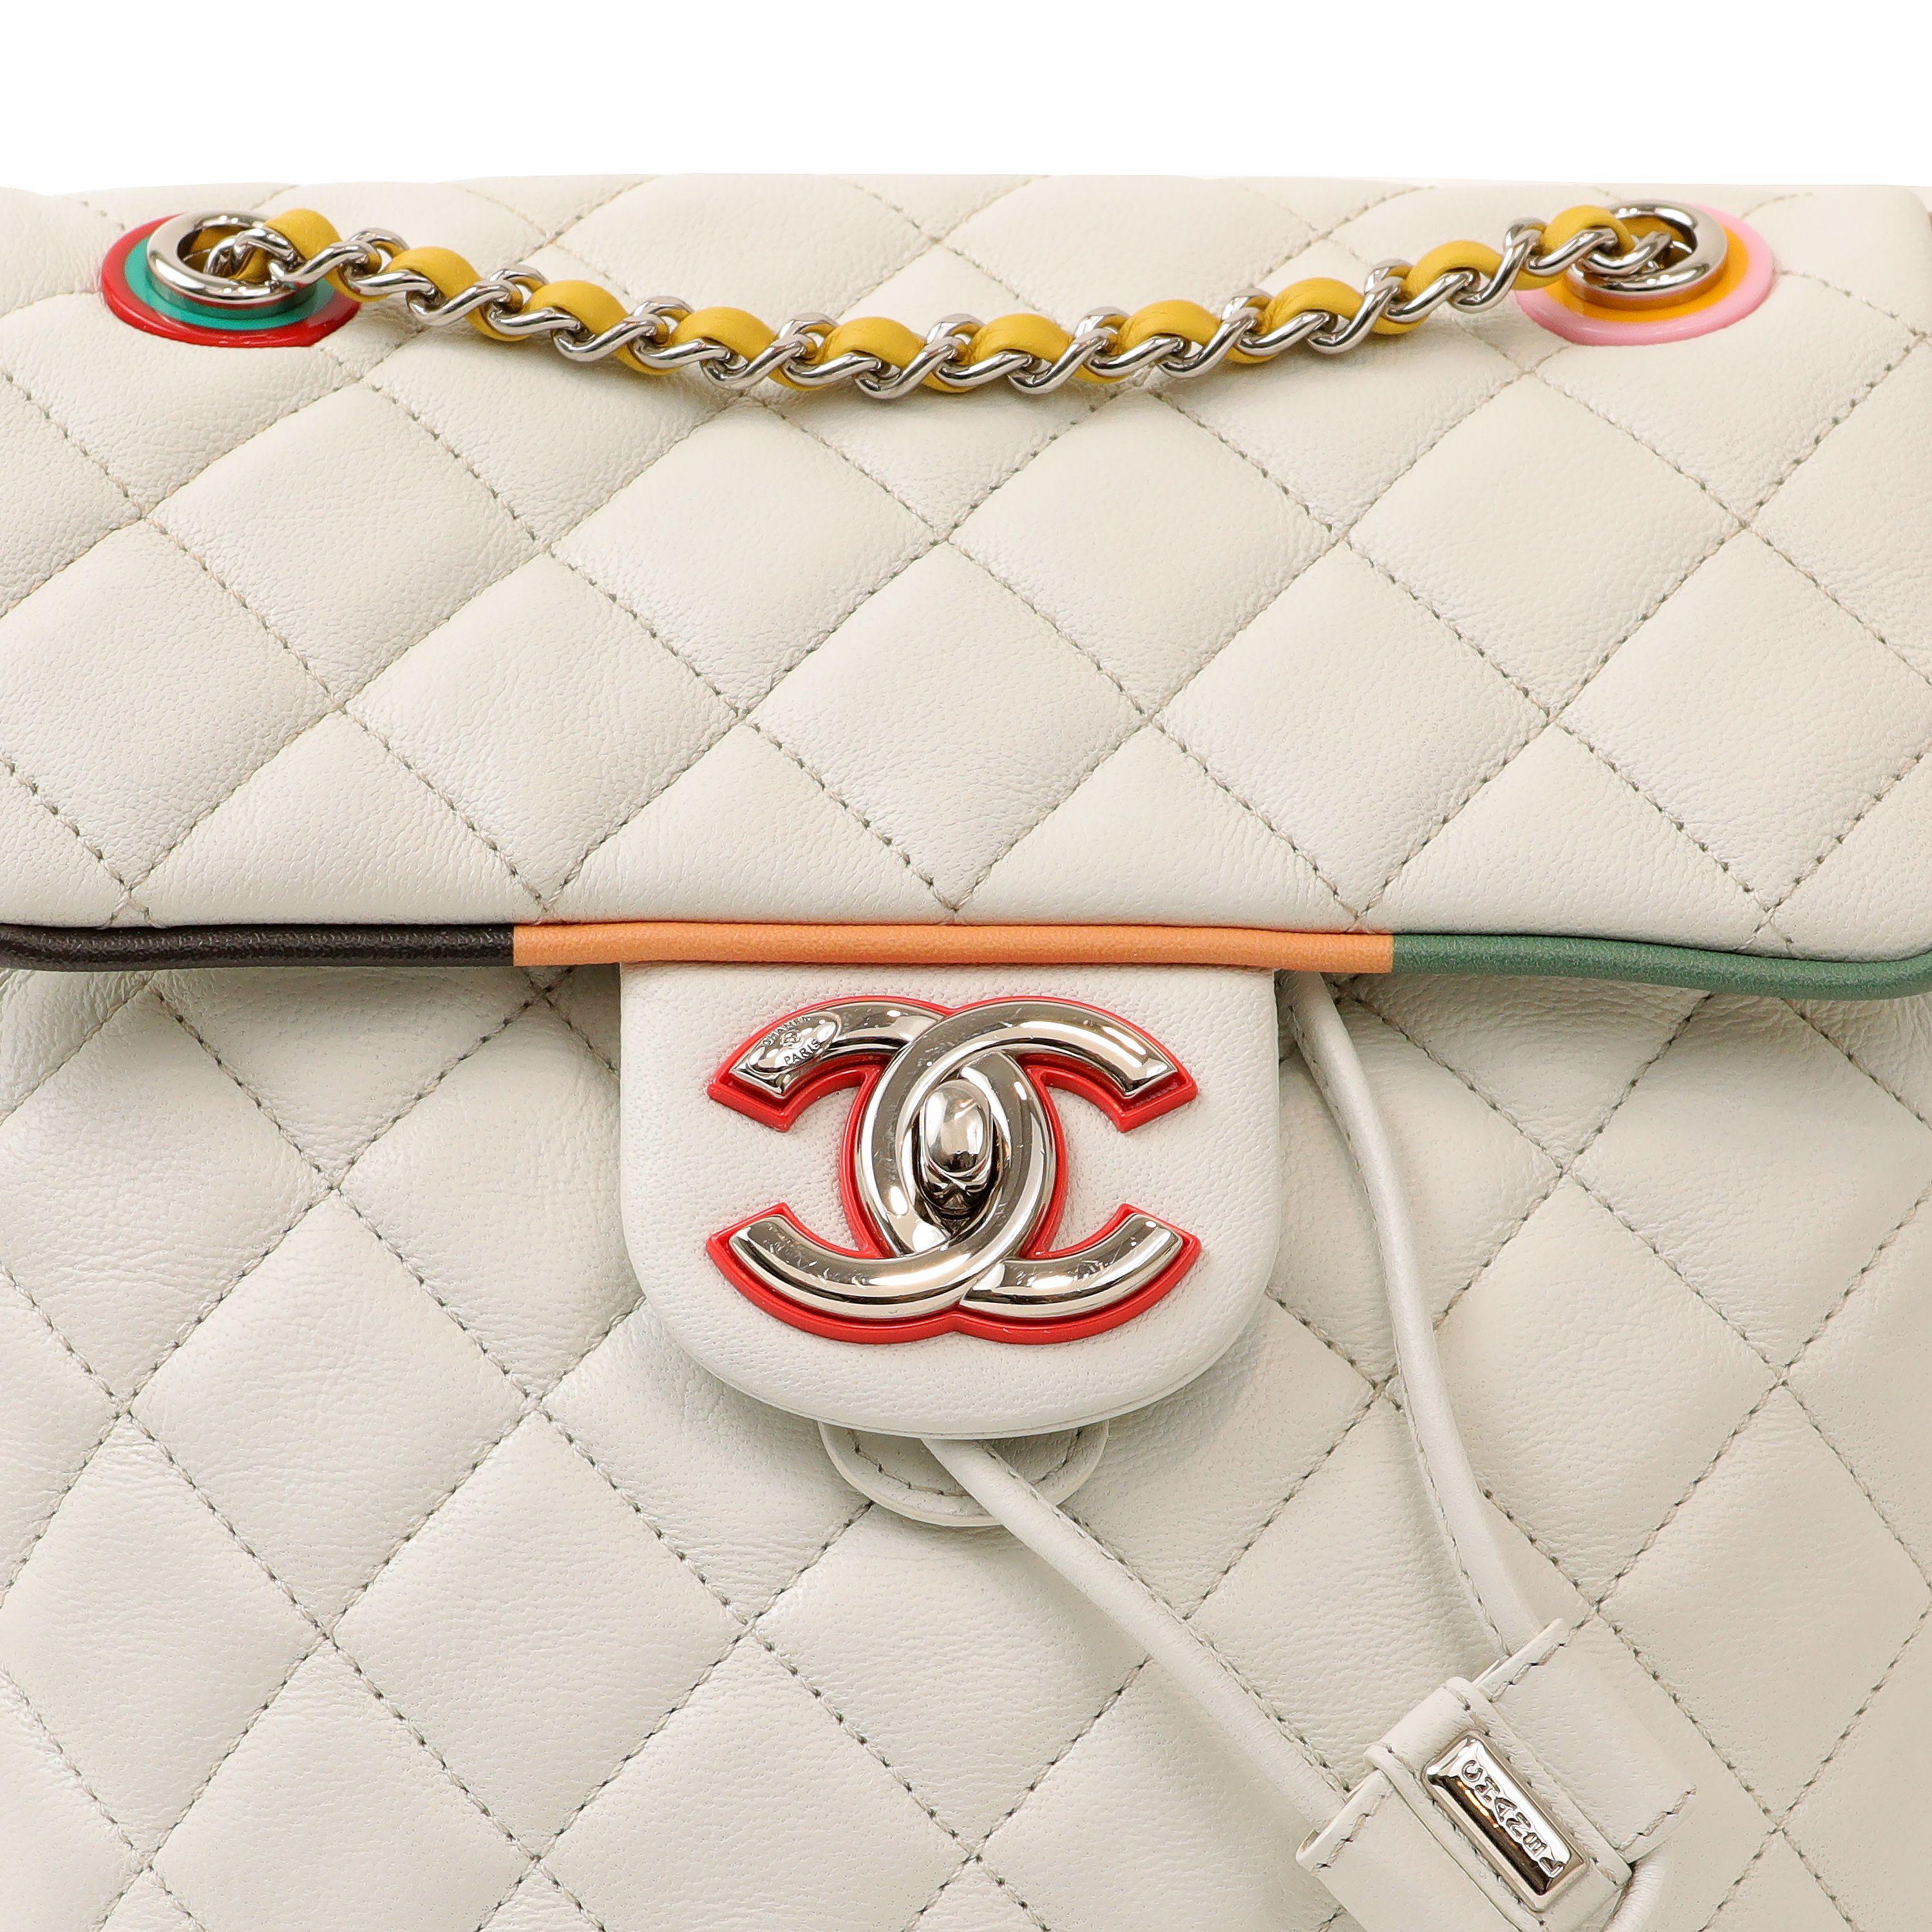 This authentic Chanel White Lambskin Urban Spirit Back is pristine.  Snowy white quilted lambskin with colorful trimmings and color blocked rear panel. Flap closure with silver hardware.  Adjustable shoulder straps.    Dust bag included. 

PBF 13913
